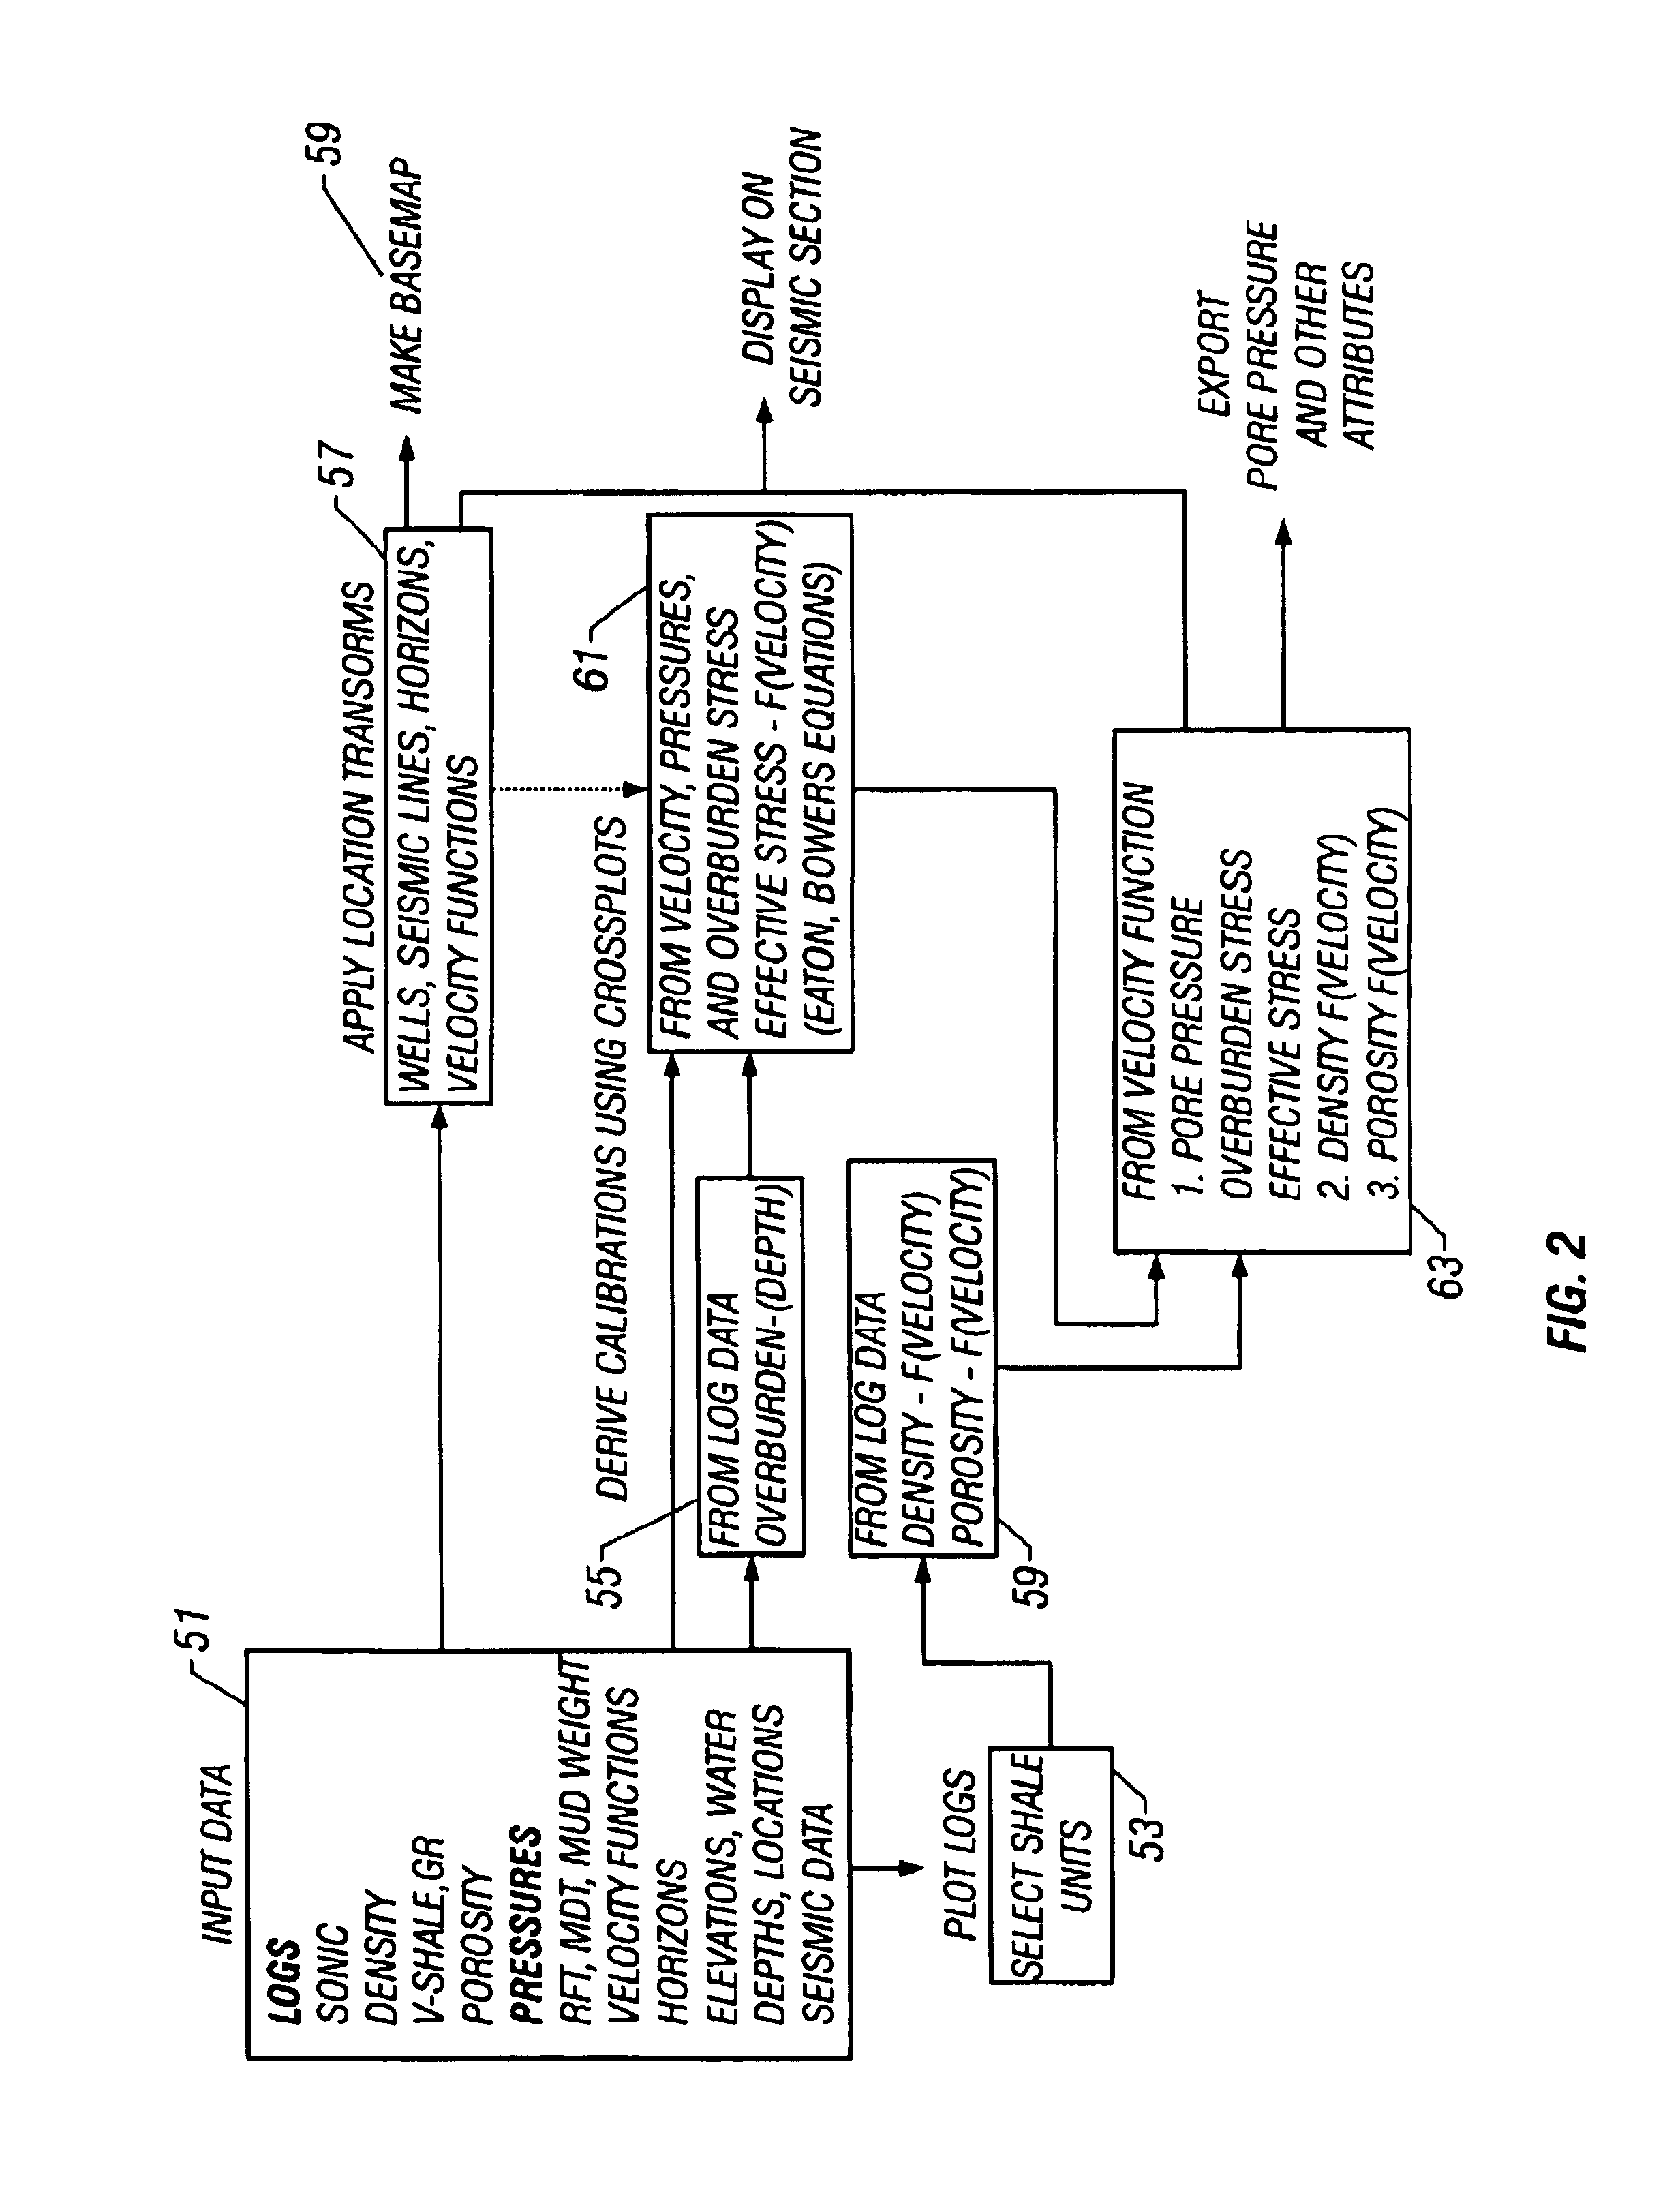 Method and process for prediction of subsurface fluid and rock pressures in the earth